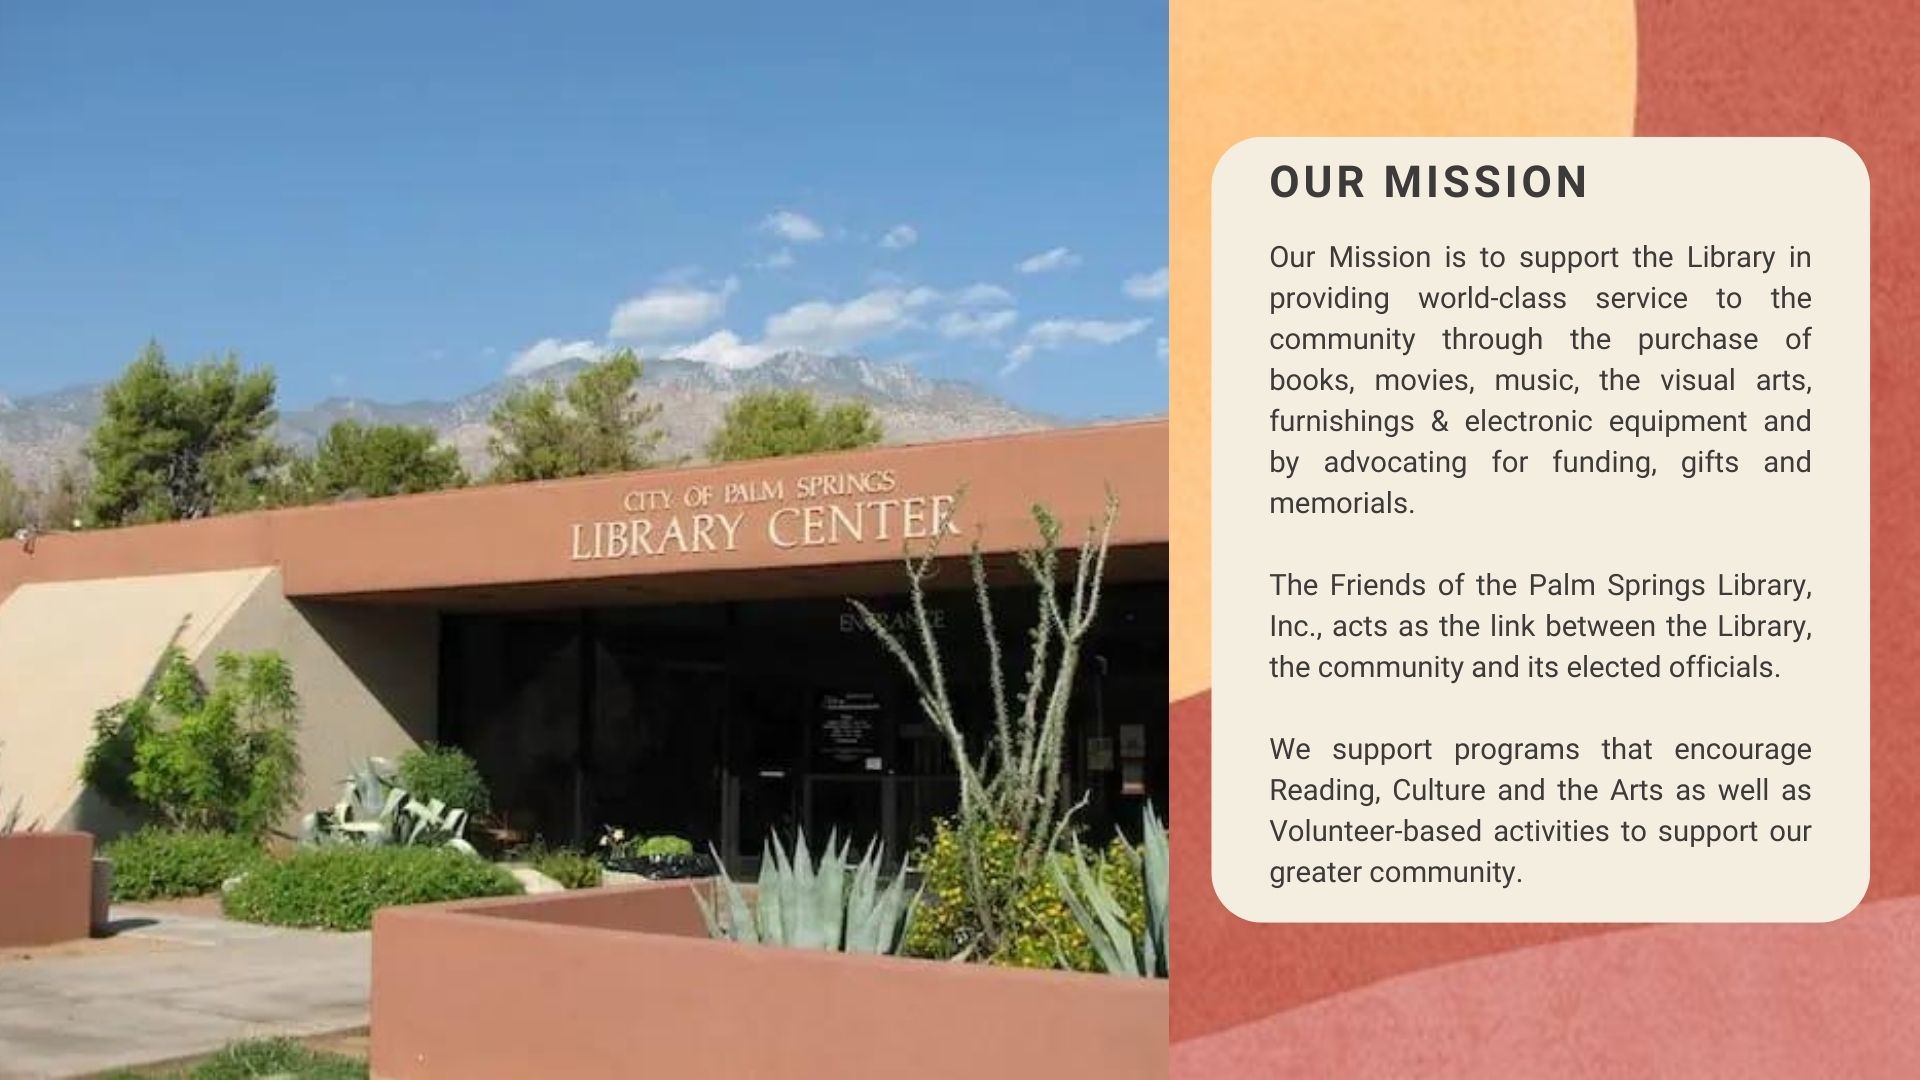 our mission.  Our Mission is to support the Library in providing world-class service to the community through the purchase of books, movies, music, the visual arts, furnishings & electronic equipment and by advocating for funding, gifts and memorials.  The Friends of the Palm Springs Library, Inc., acts as the link between the Library, the community and its elected officials.   We support programs that encourage Reading, Culture and the Arts as well as Volunteer-based activities to support our greater community.